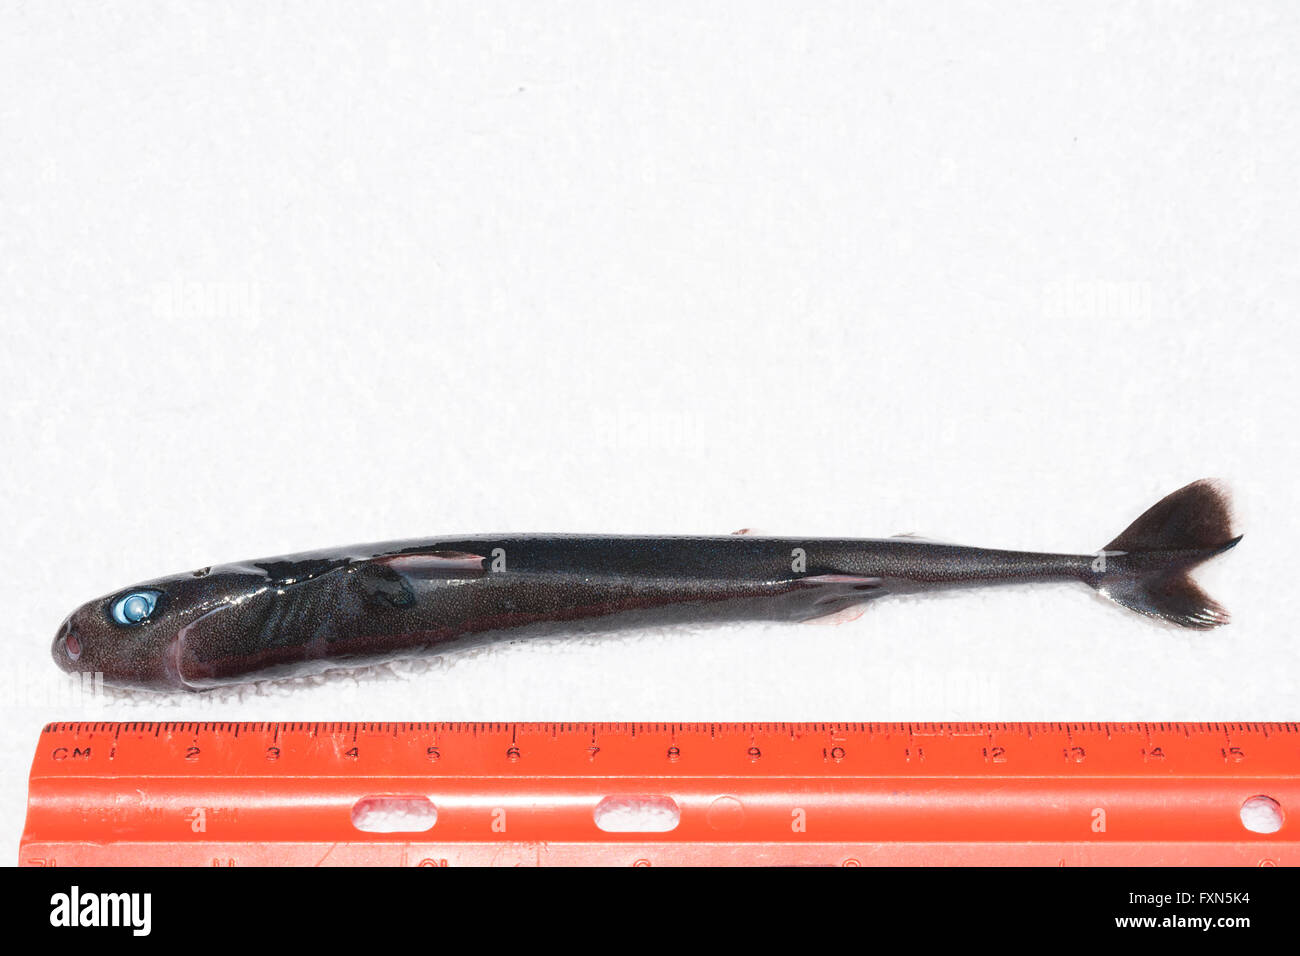 pygmy shark, Euprotomicrus bispinatus (c), one of the smallest species of sharks; this specimen about 15 cm) long; Hawaii Stock Photo